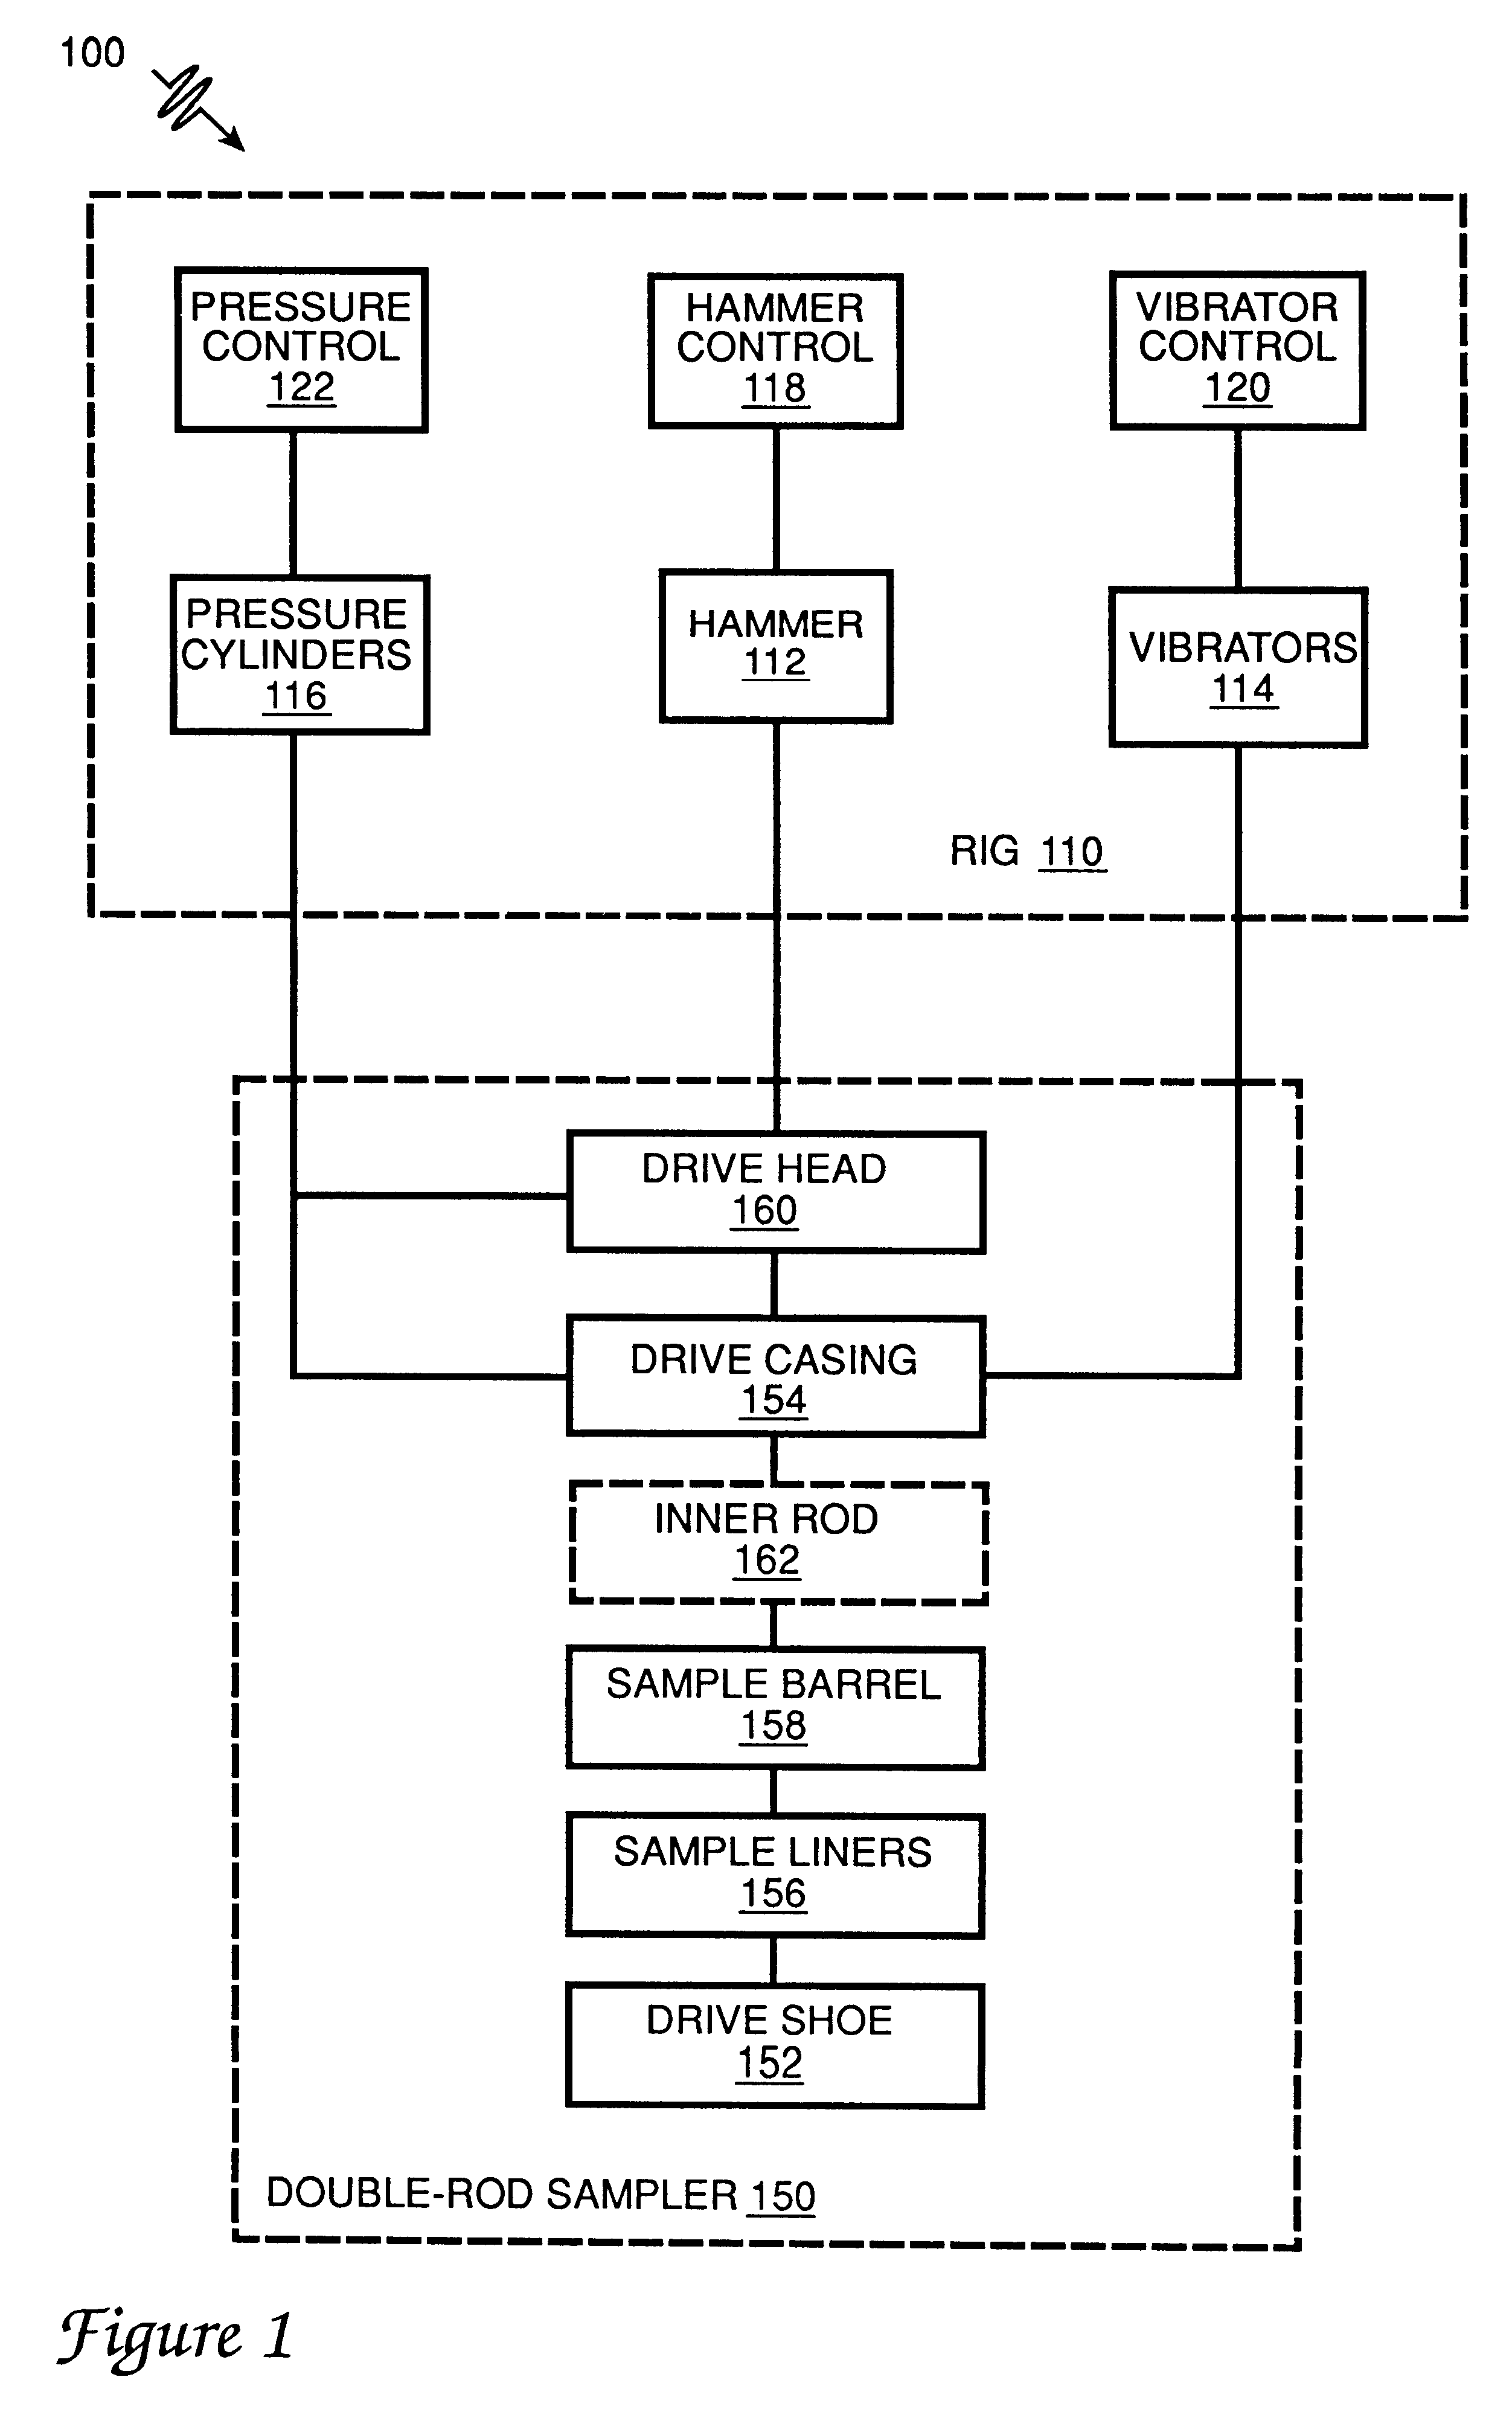 Soil sampling system with sample container rigidly coupled to drive casing